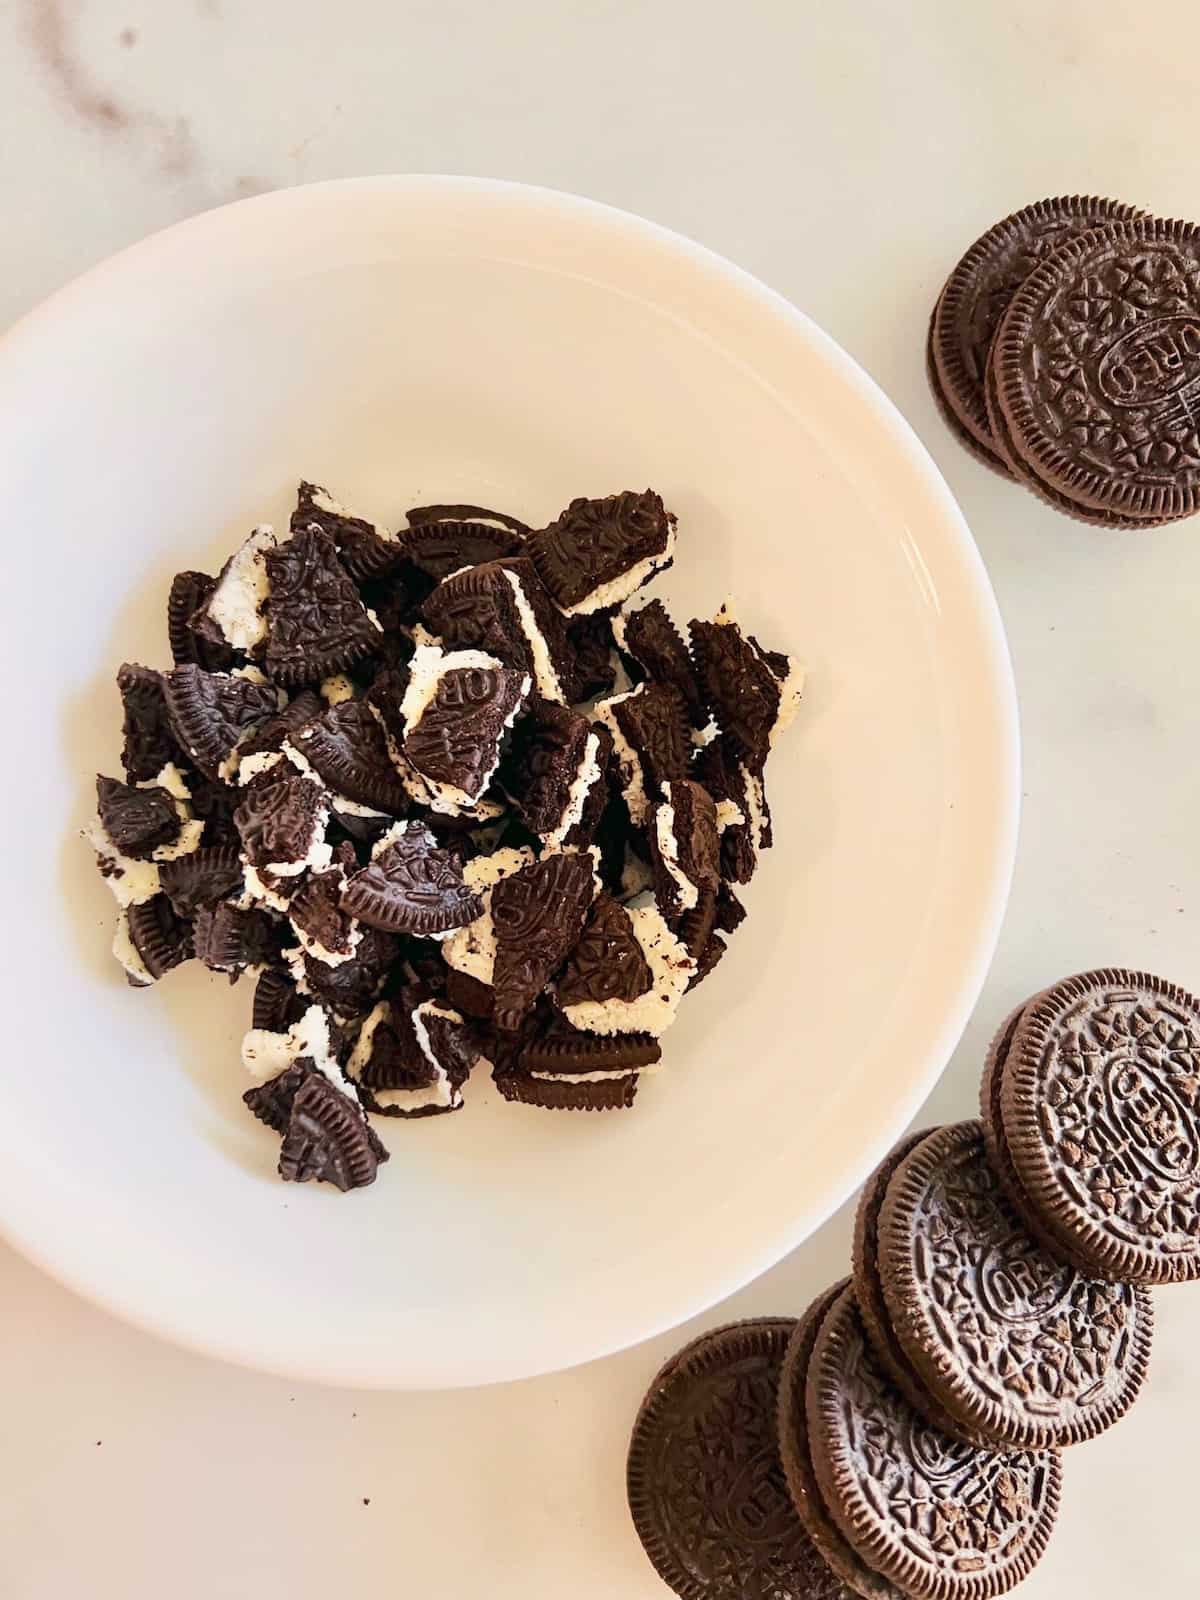 Breaking Oreos into bits and pieces in a bowl.